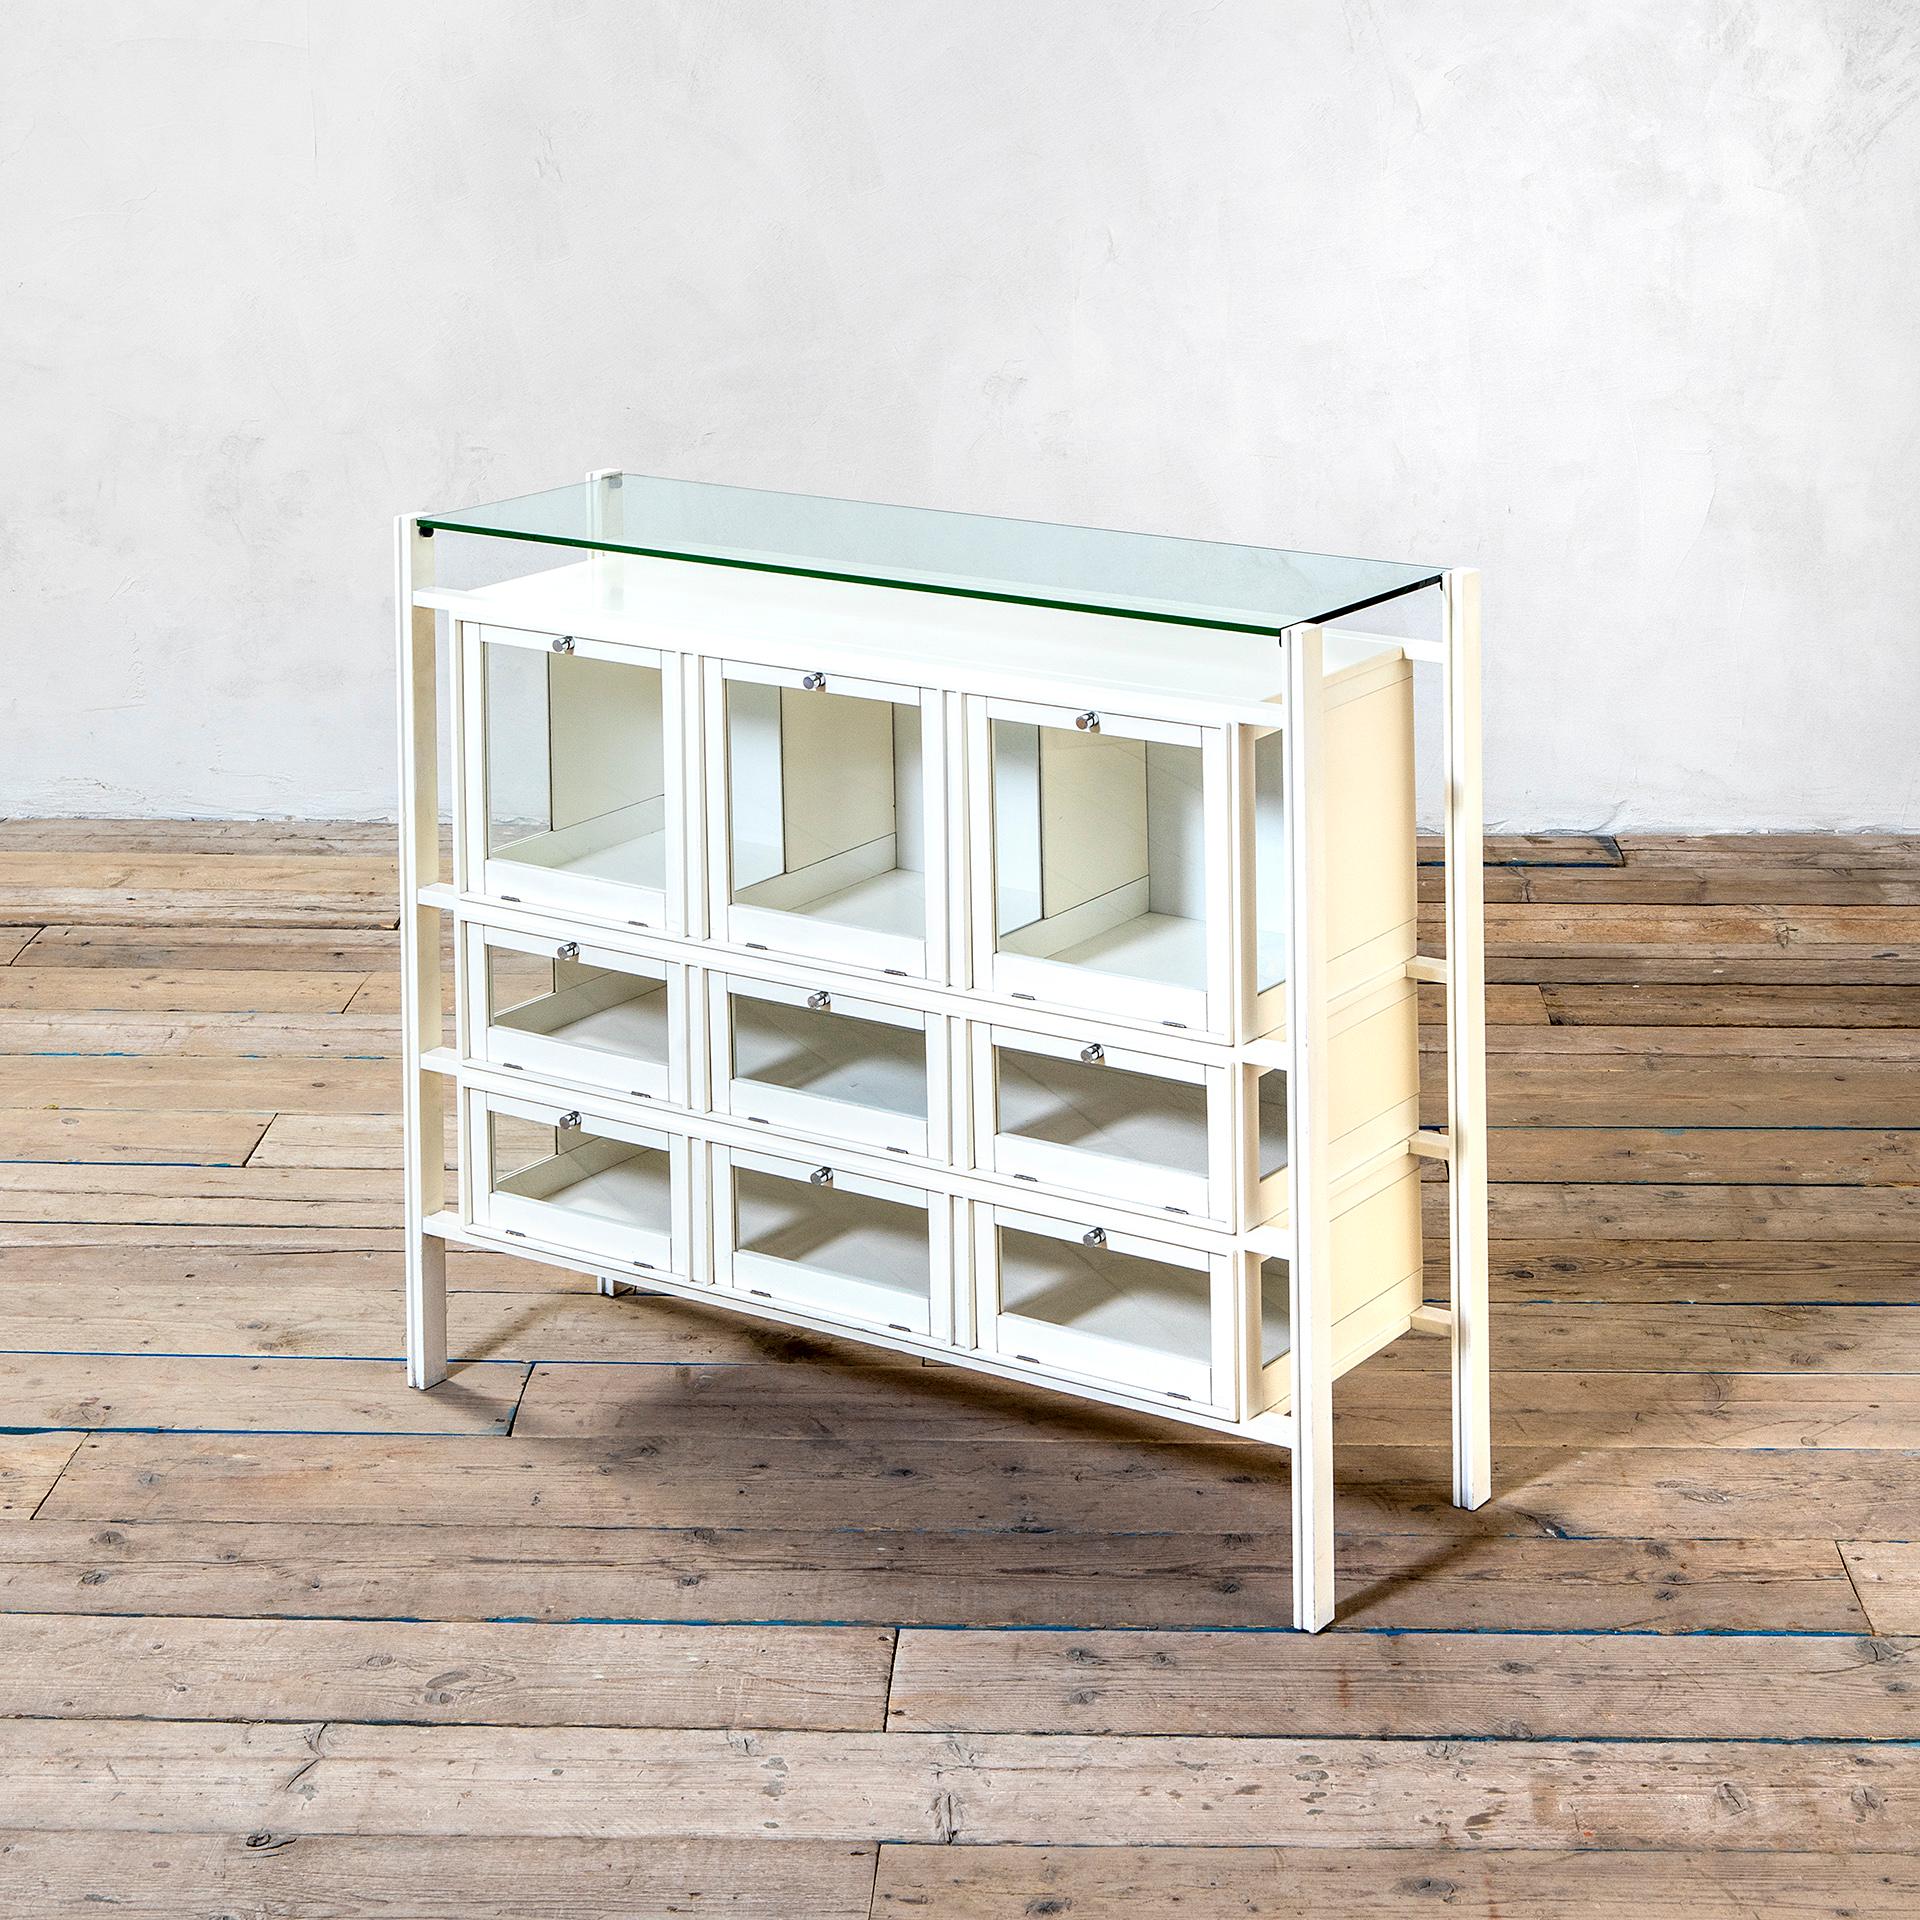 Vitrine designed by Carlo De Carli in 1941 for Italia Production. The structure is in white lacquered wood, the front of the credenza has nine shelves that could be opened through flap doors. Perfect for showing personal collection or for the dining